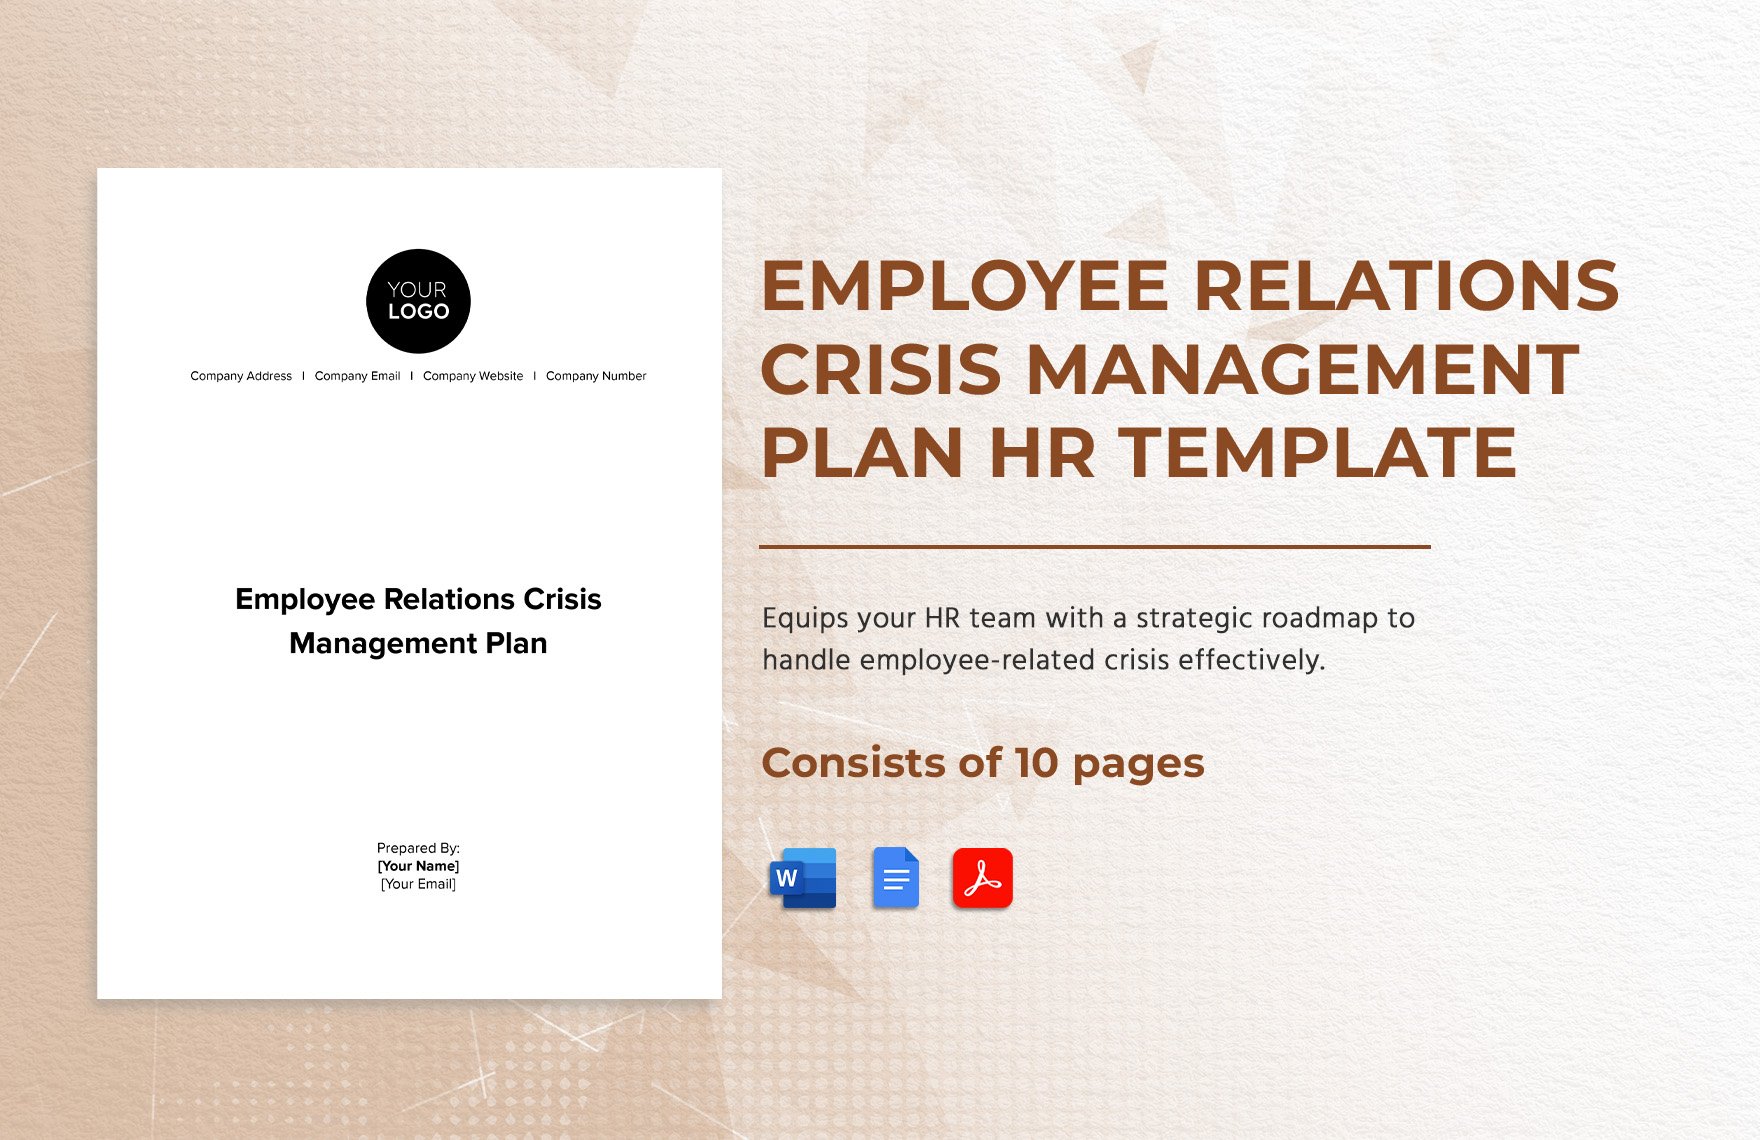 Employee Relations Crisis Management Plan HR Template in Word, Google Docs, PDF